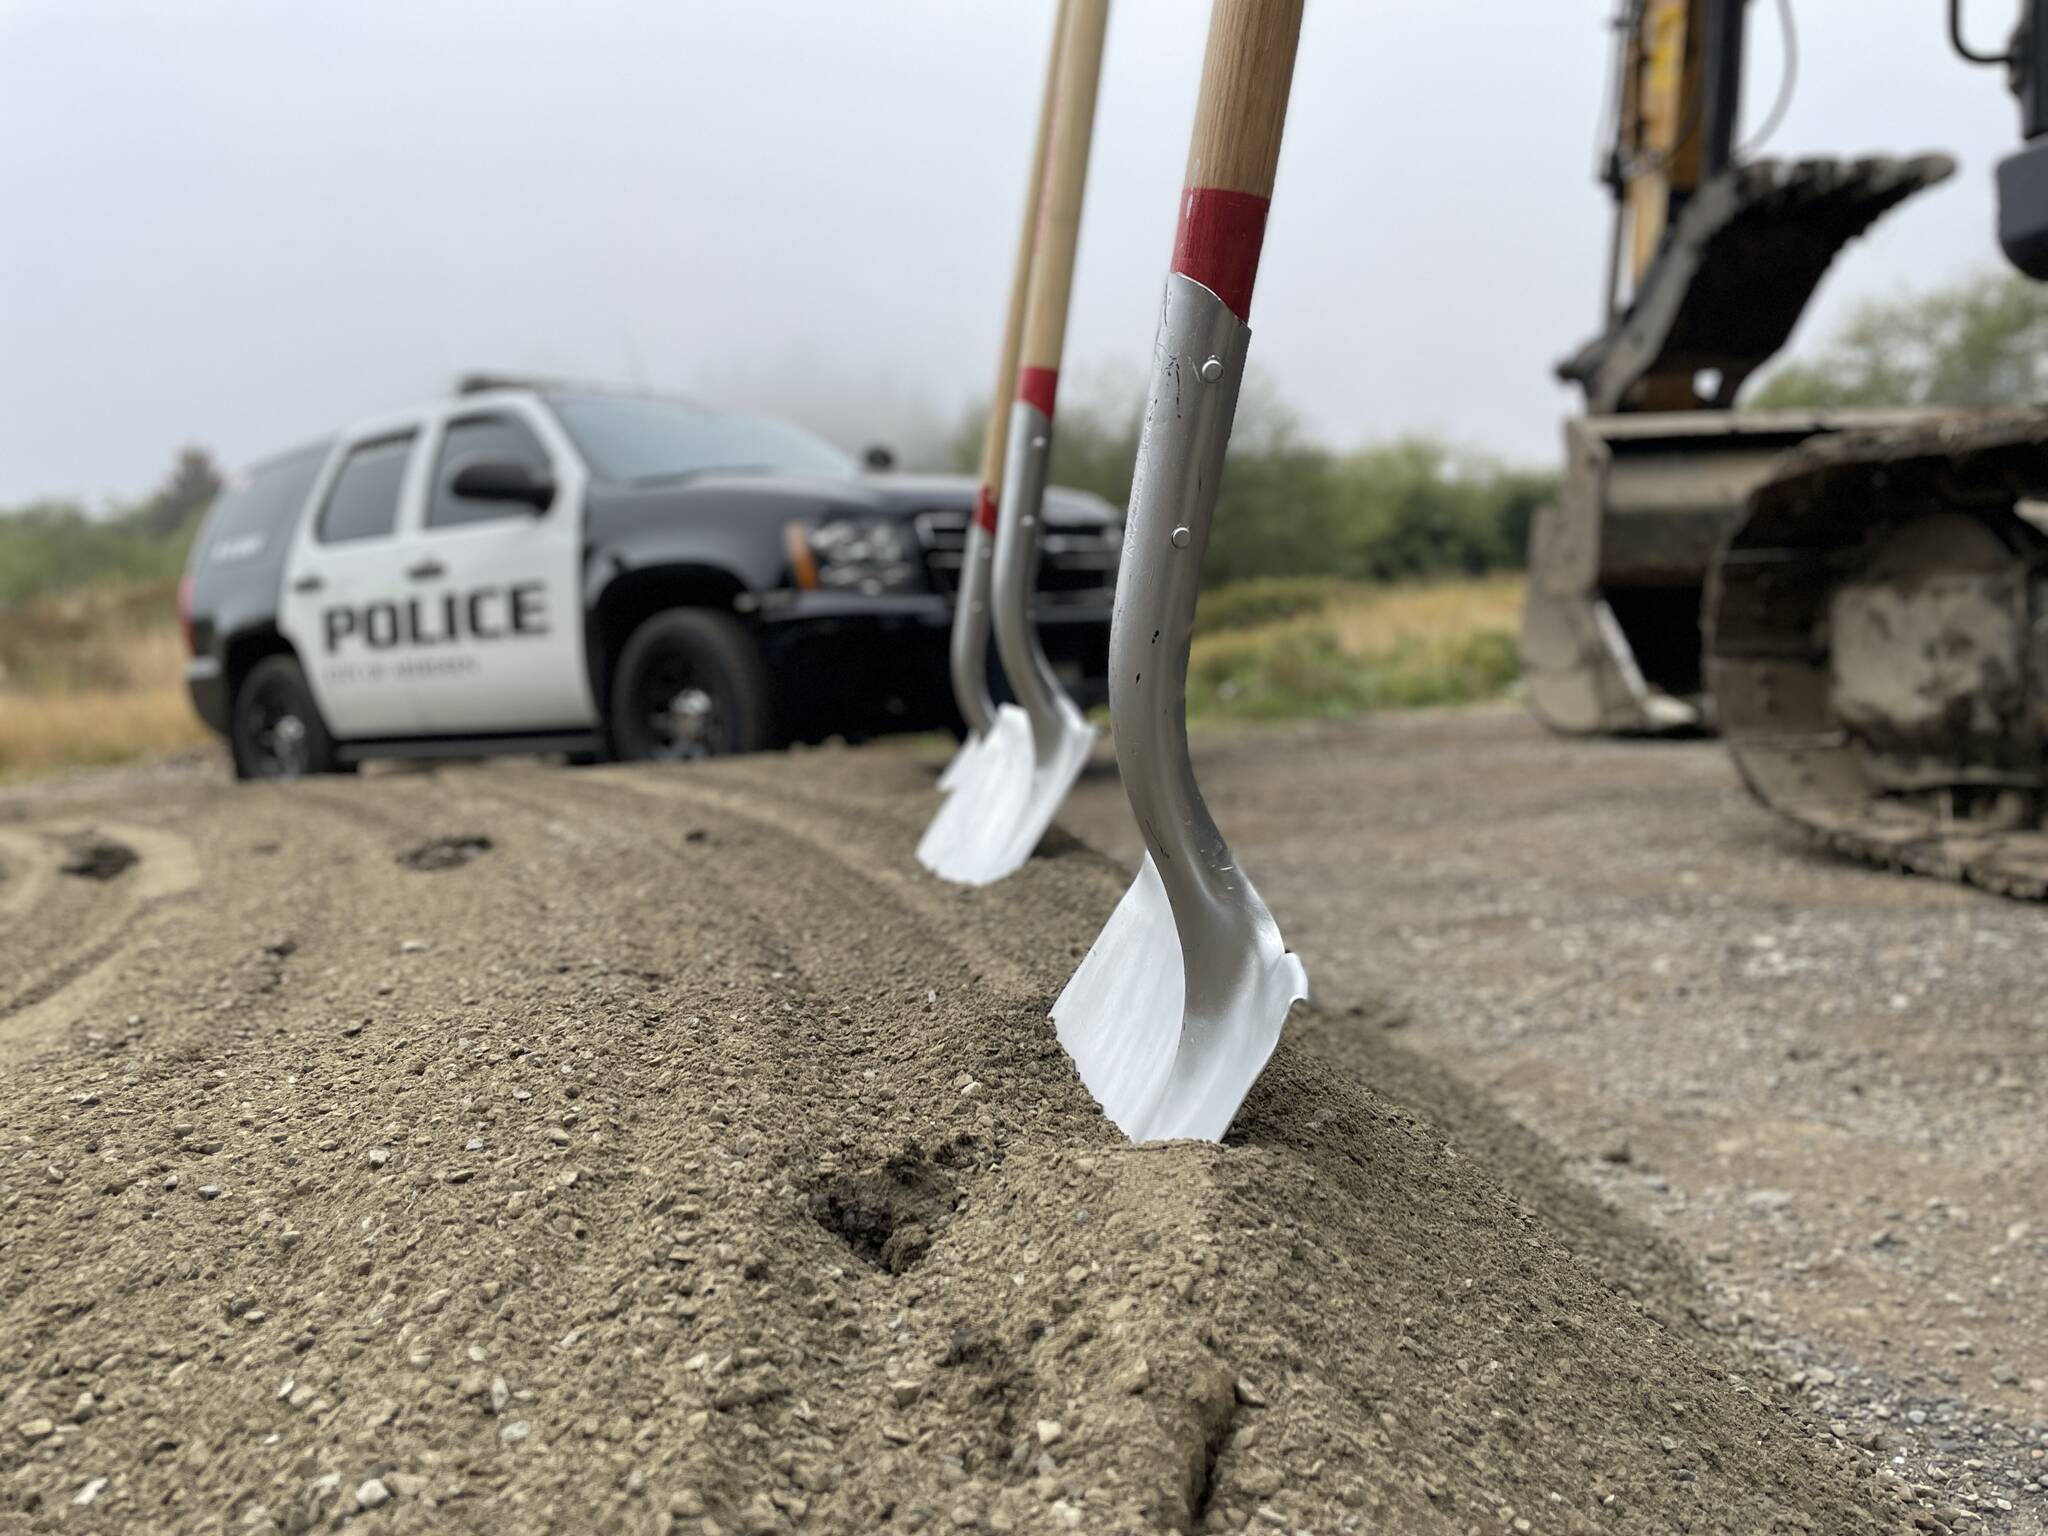 Aberdeen police and city officials broke ground on a new firing range on Oct. 7, 2022, dedicated to a former officer with the department. Michael S. Lockett | The Daily World